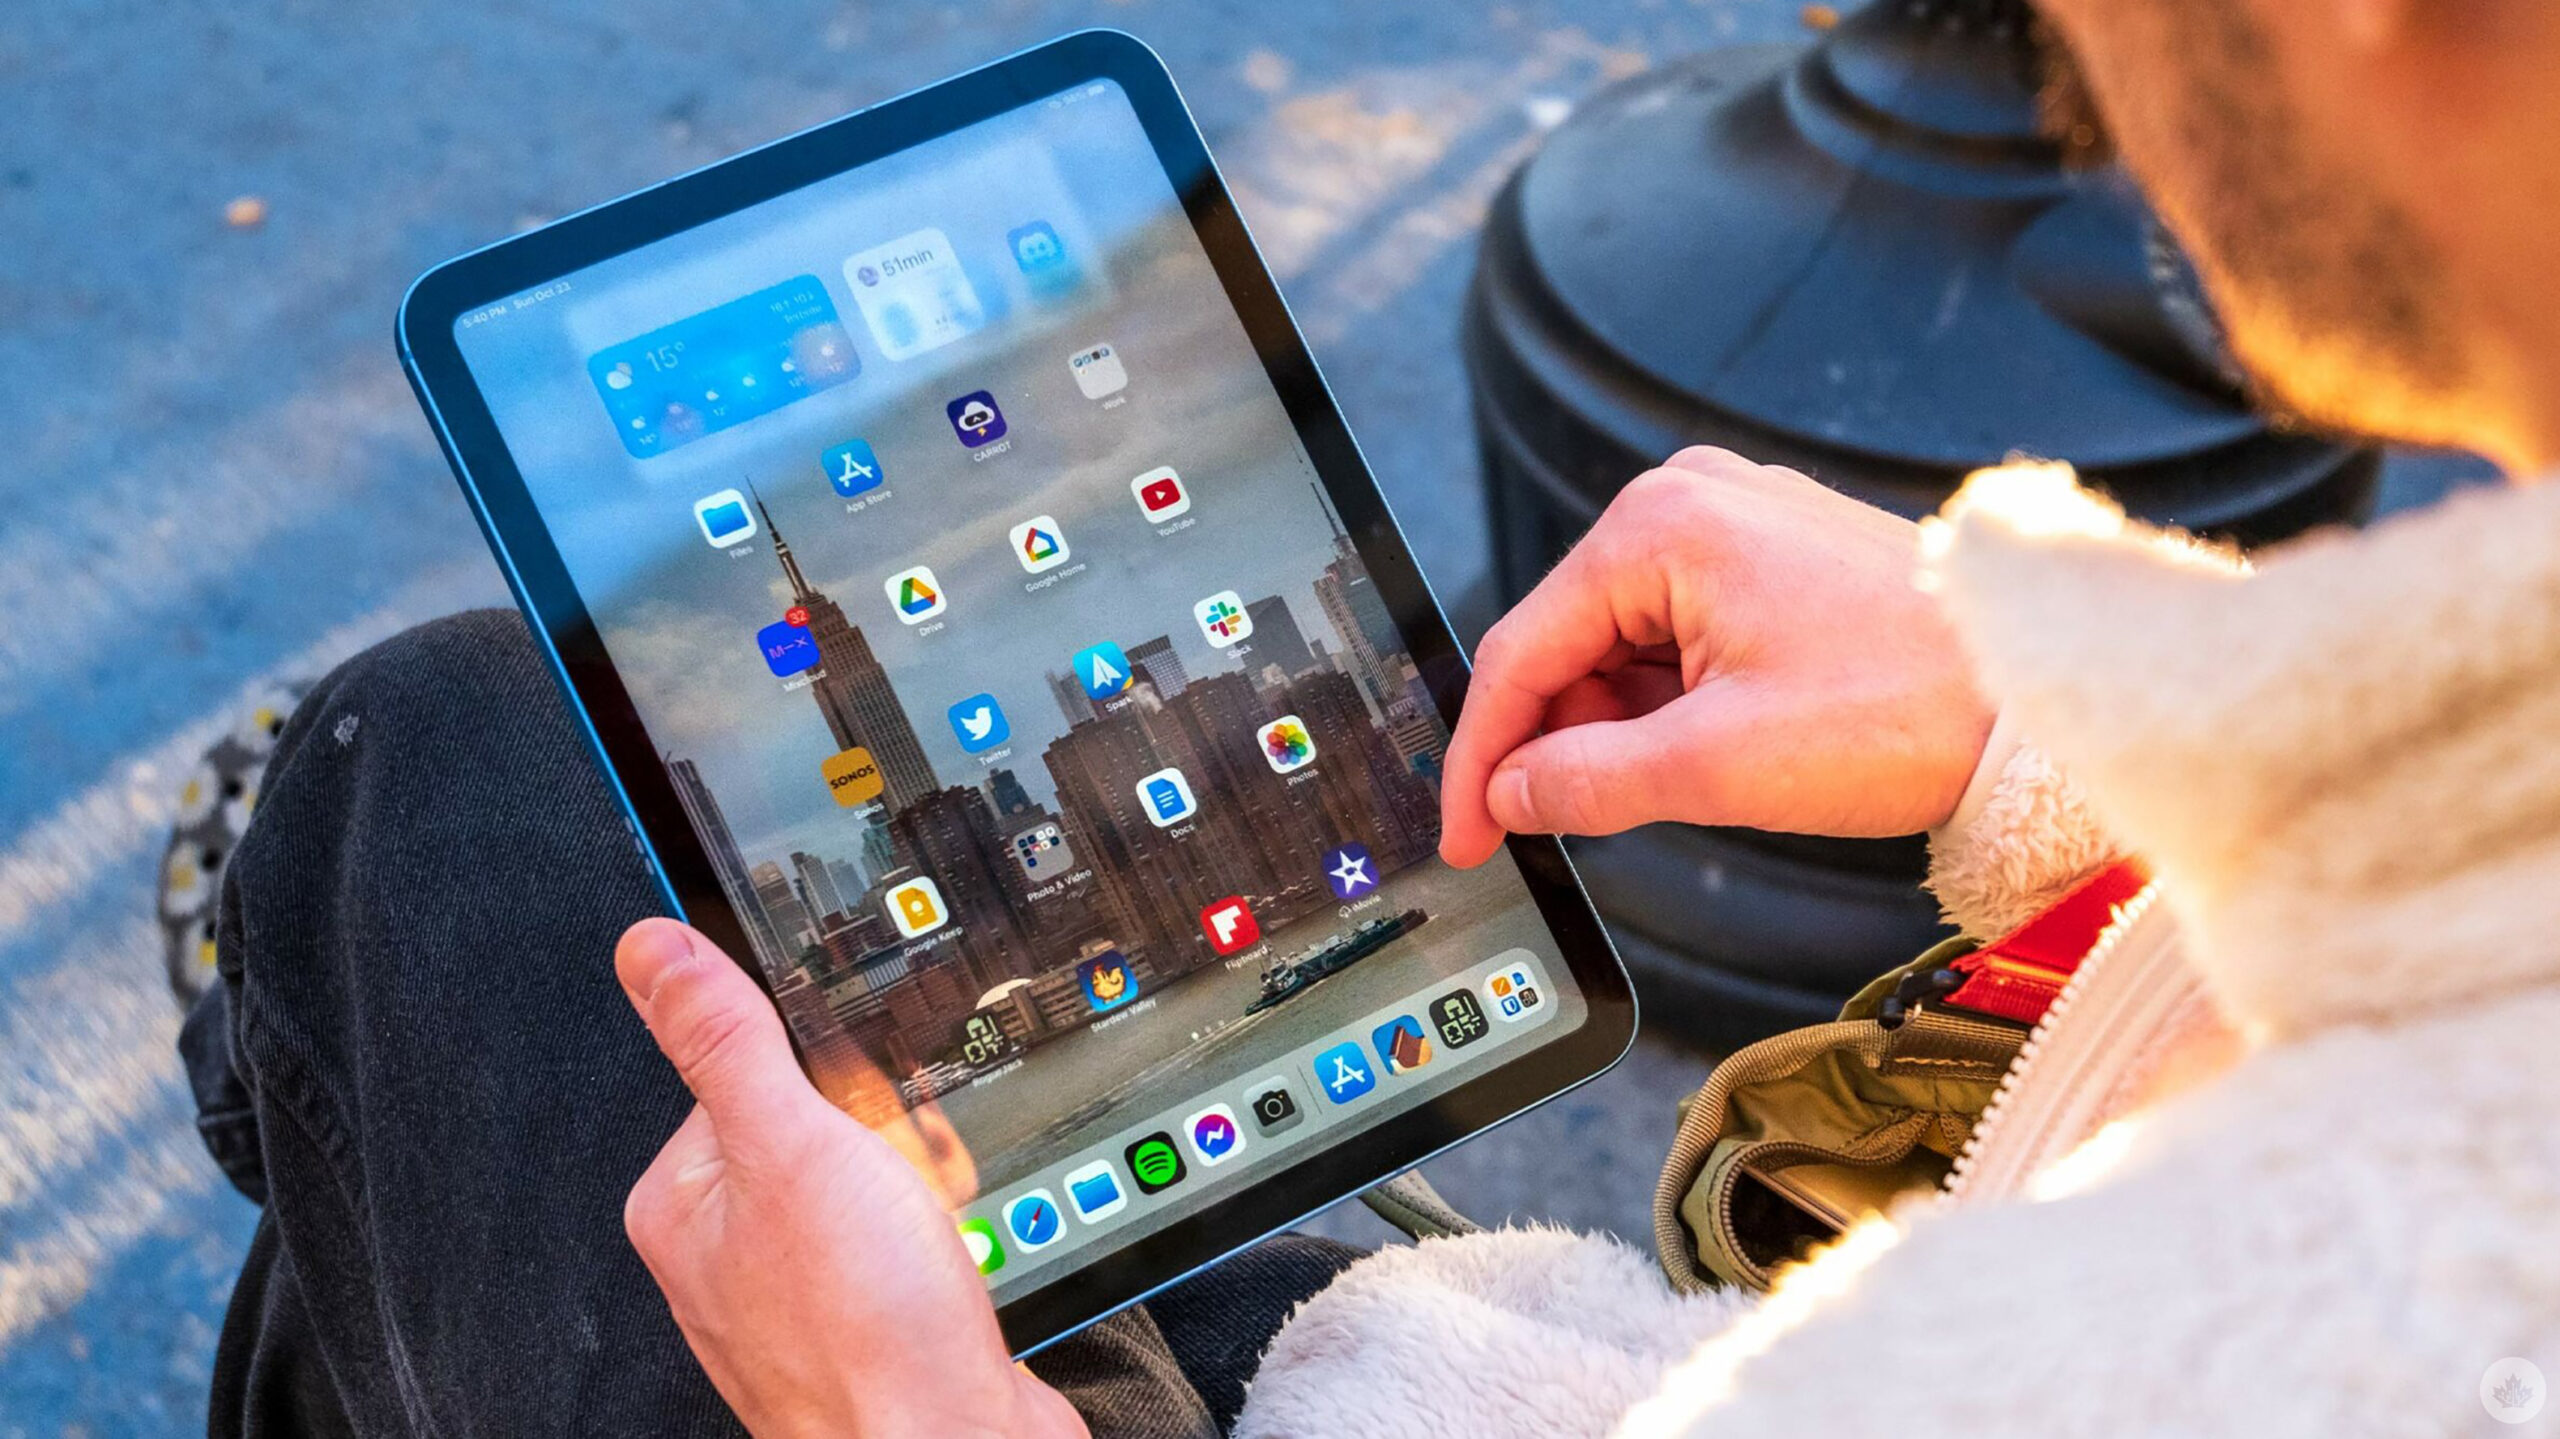 Apple to launch 10.9-inch OLED iPad Air in 2022, iPad Pro in 2023